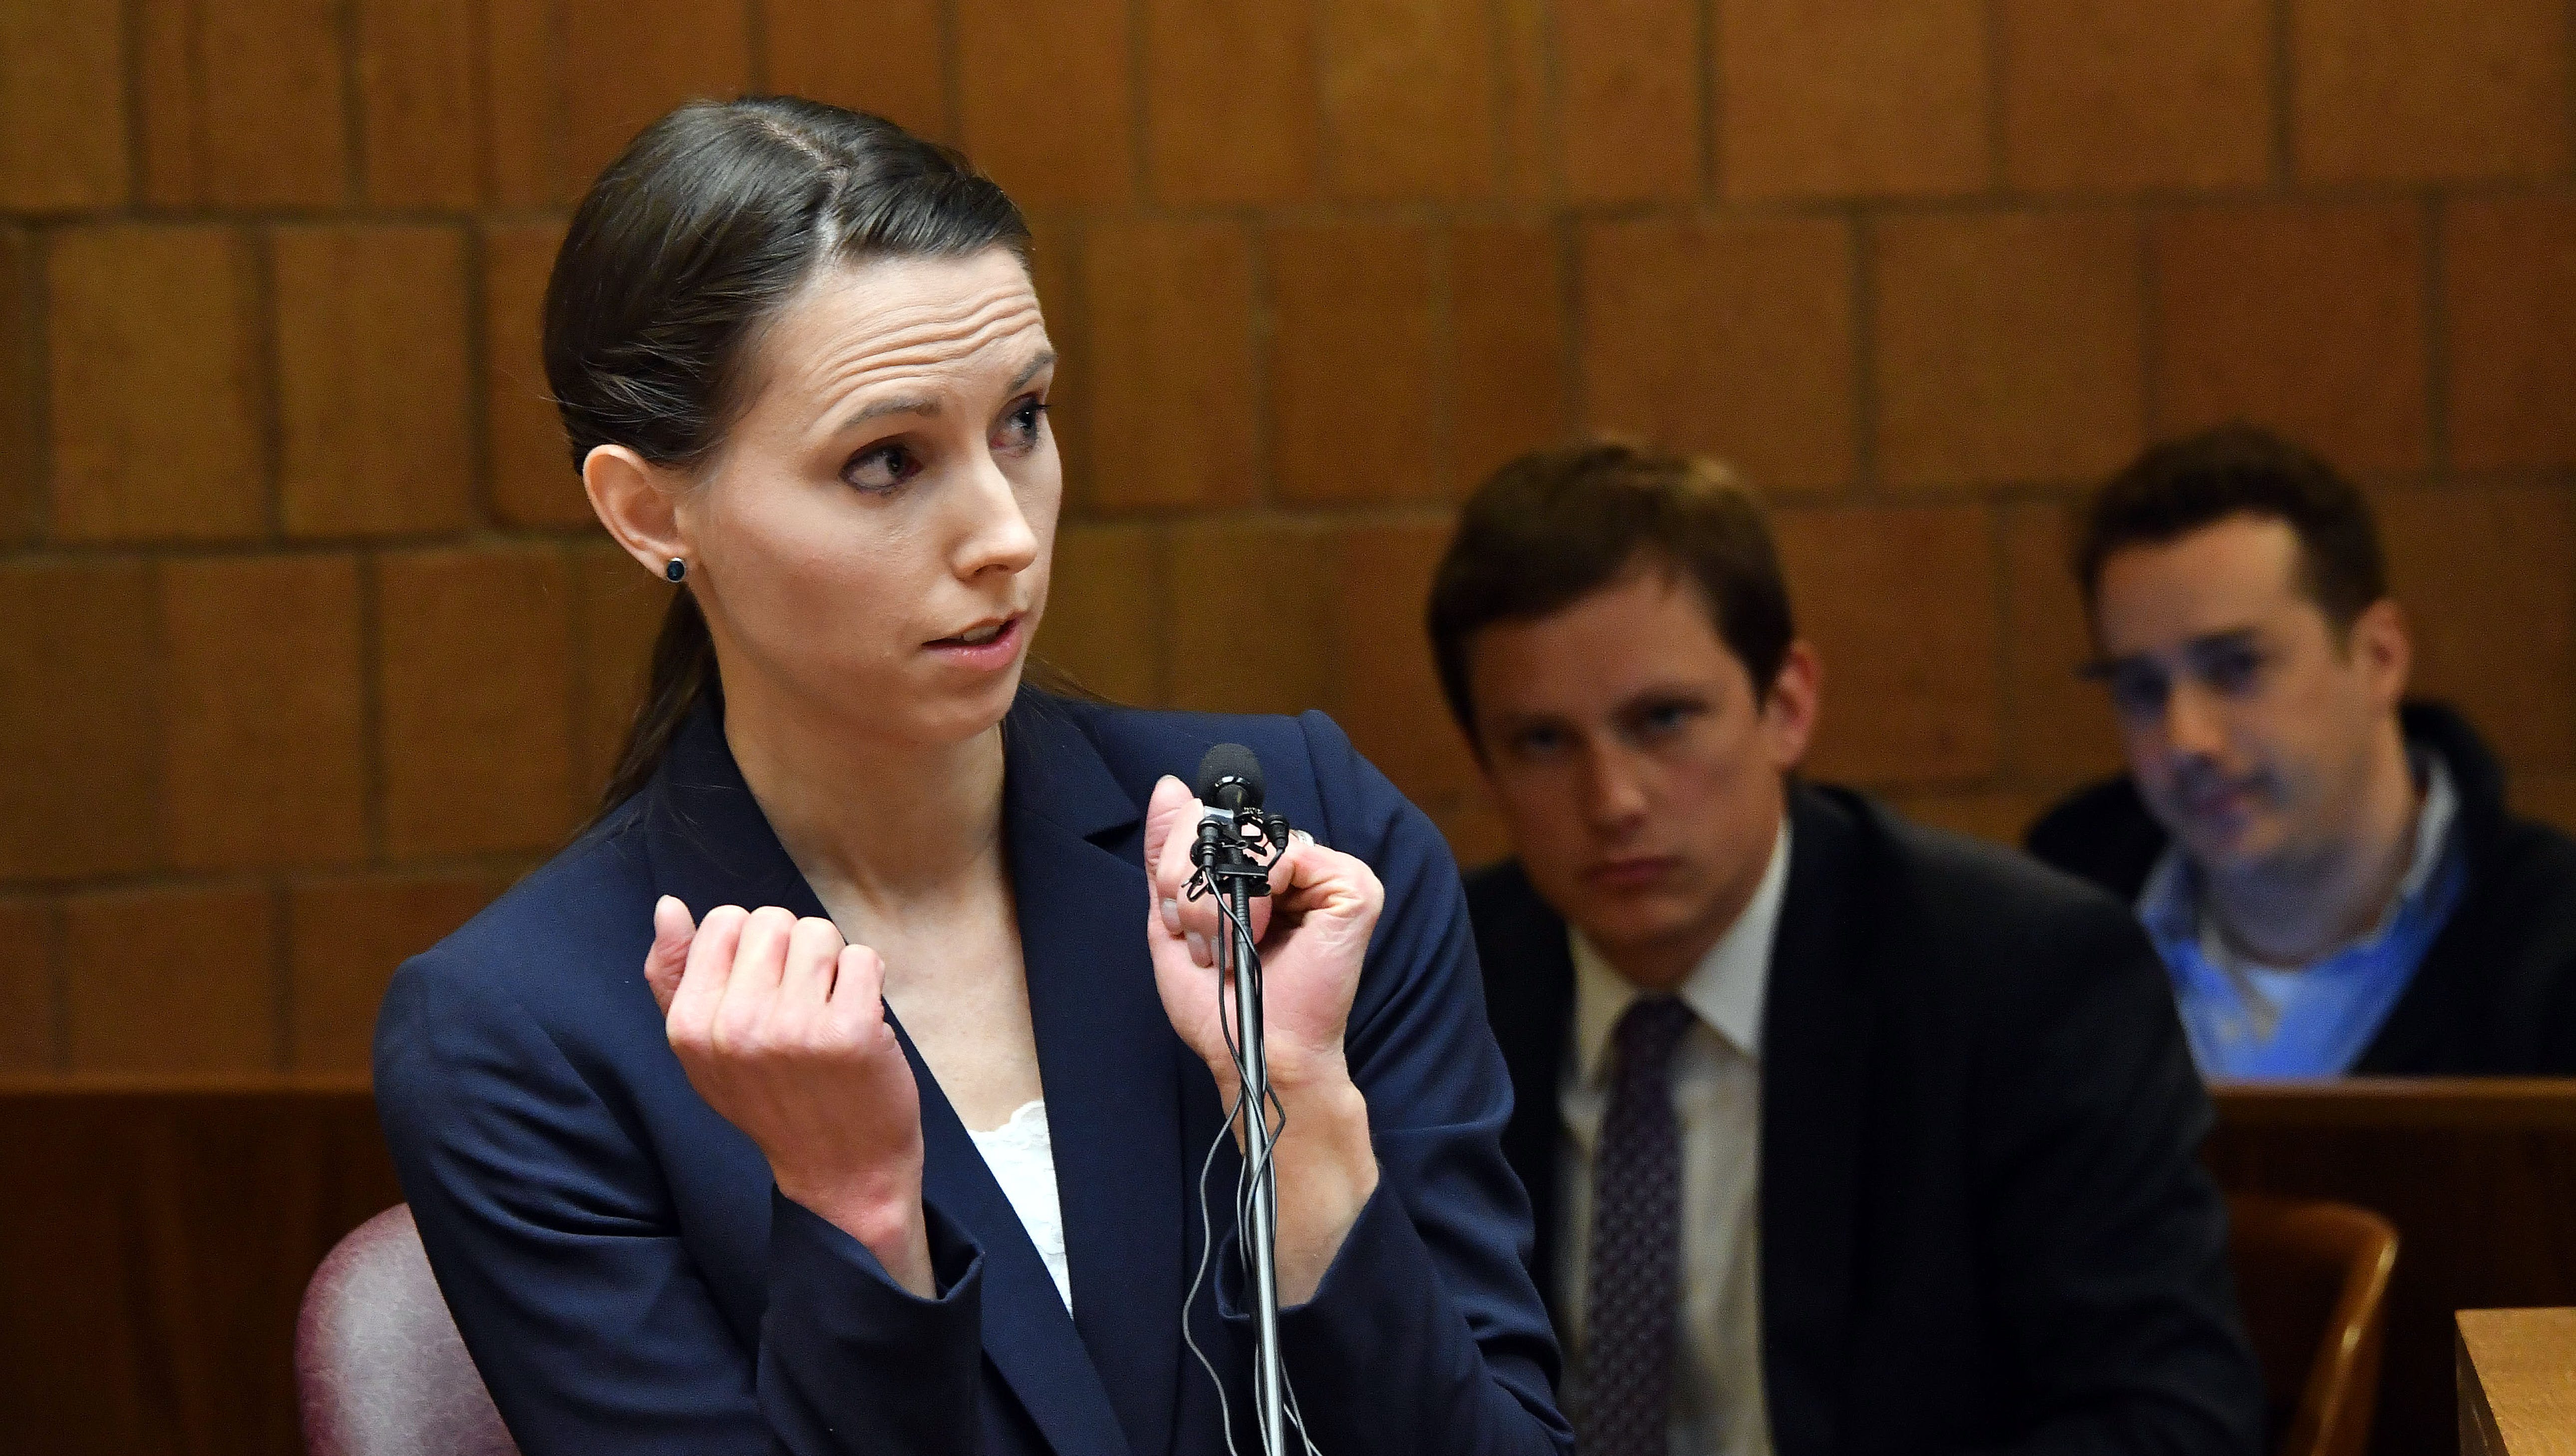 Rachel Denhollander accusation gained traction, opening the floodgates for hundreds of other women with similar allegations and sparking one of the biggest scandals in amateur sports history. Denhollander testifies during the pre-trial hearing for Larry Nassar on May 12, 2017.